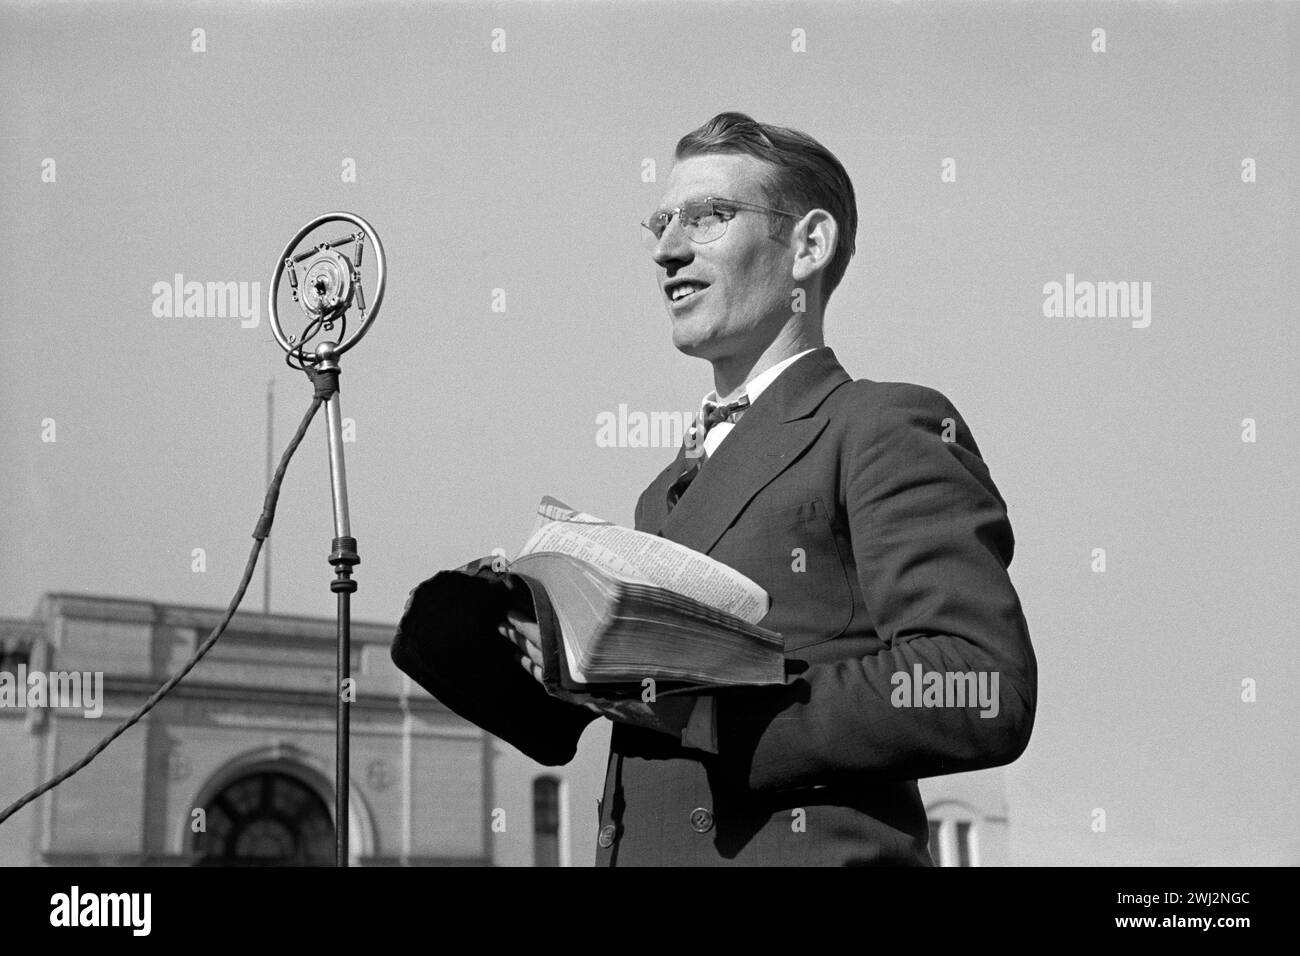 Itinerant preacher broadcasting to his audience by means of public address system on street, Marshall, Texas, USA, Russell Lee, U.S. Farm Security Administration, April 1939 Stock Photo